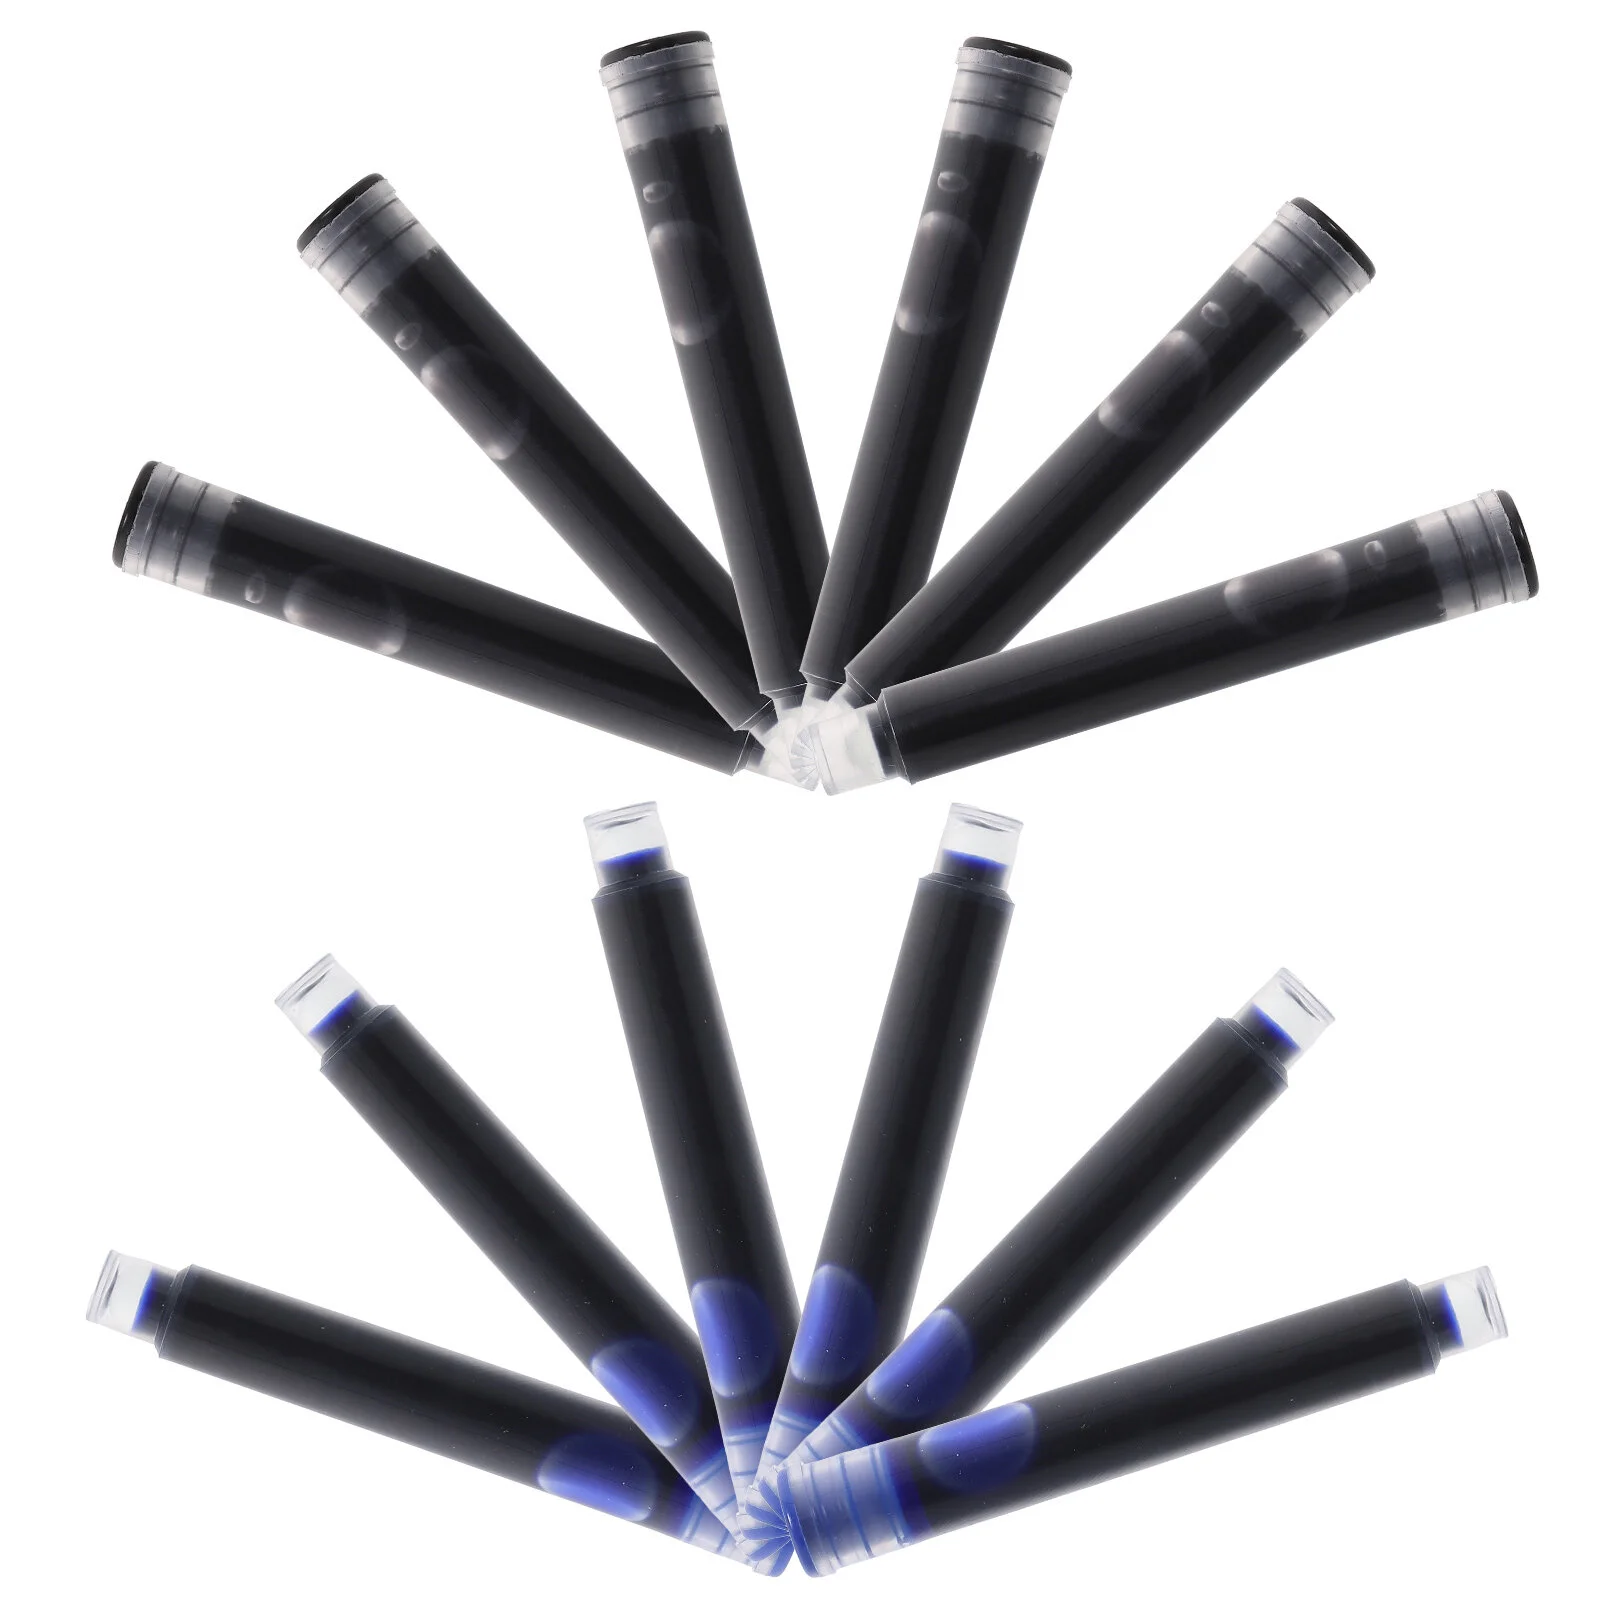 

100 Pcs Blue Accessories Supplies Office Ink Cartridges Refills Replaceable Fountain Pen Supolies Student